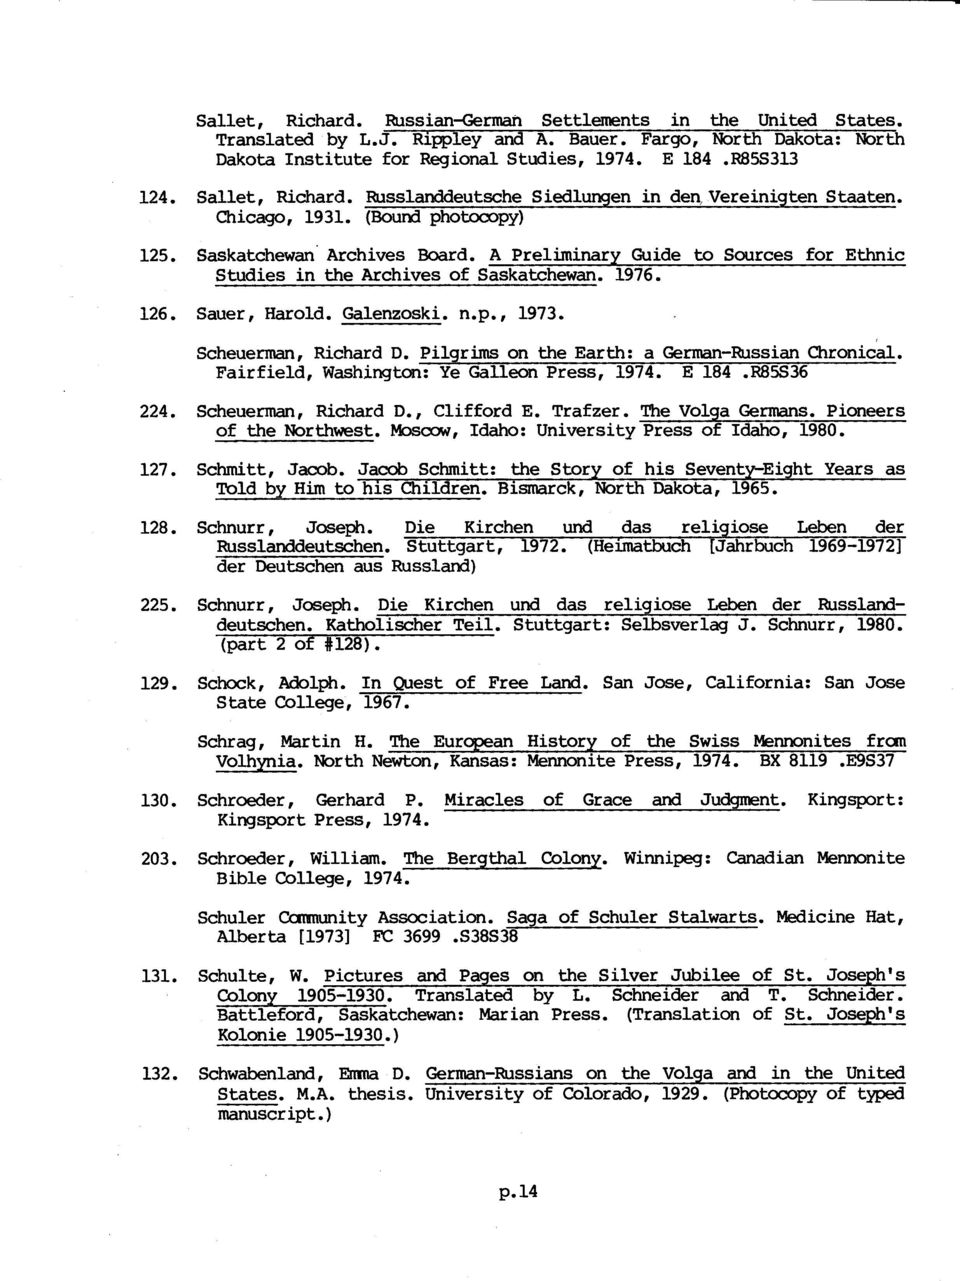 A Preliminary Guide to Sources for Ethnic Studies in the Archives of Saskatchewan. 1976. 126. Sauer, Harold. Galenzoski. n.p., 1973, Scheuerman, Richard D.